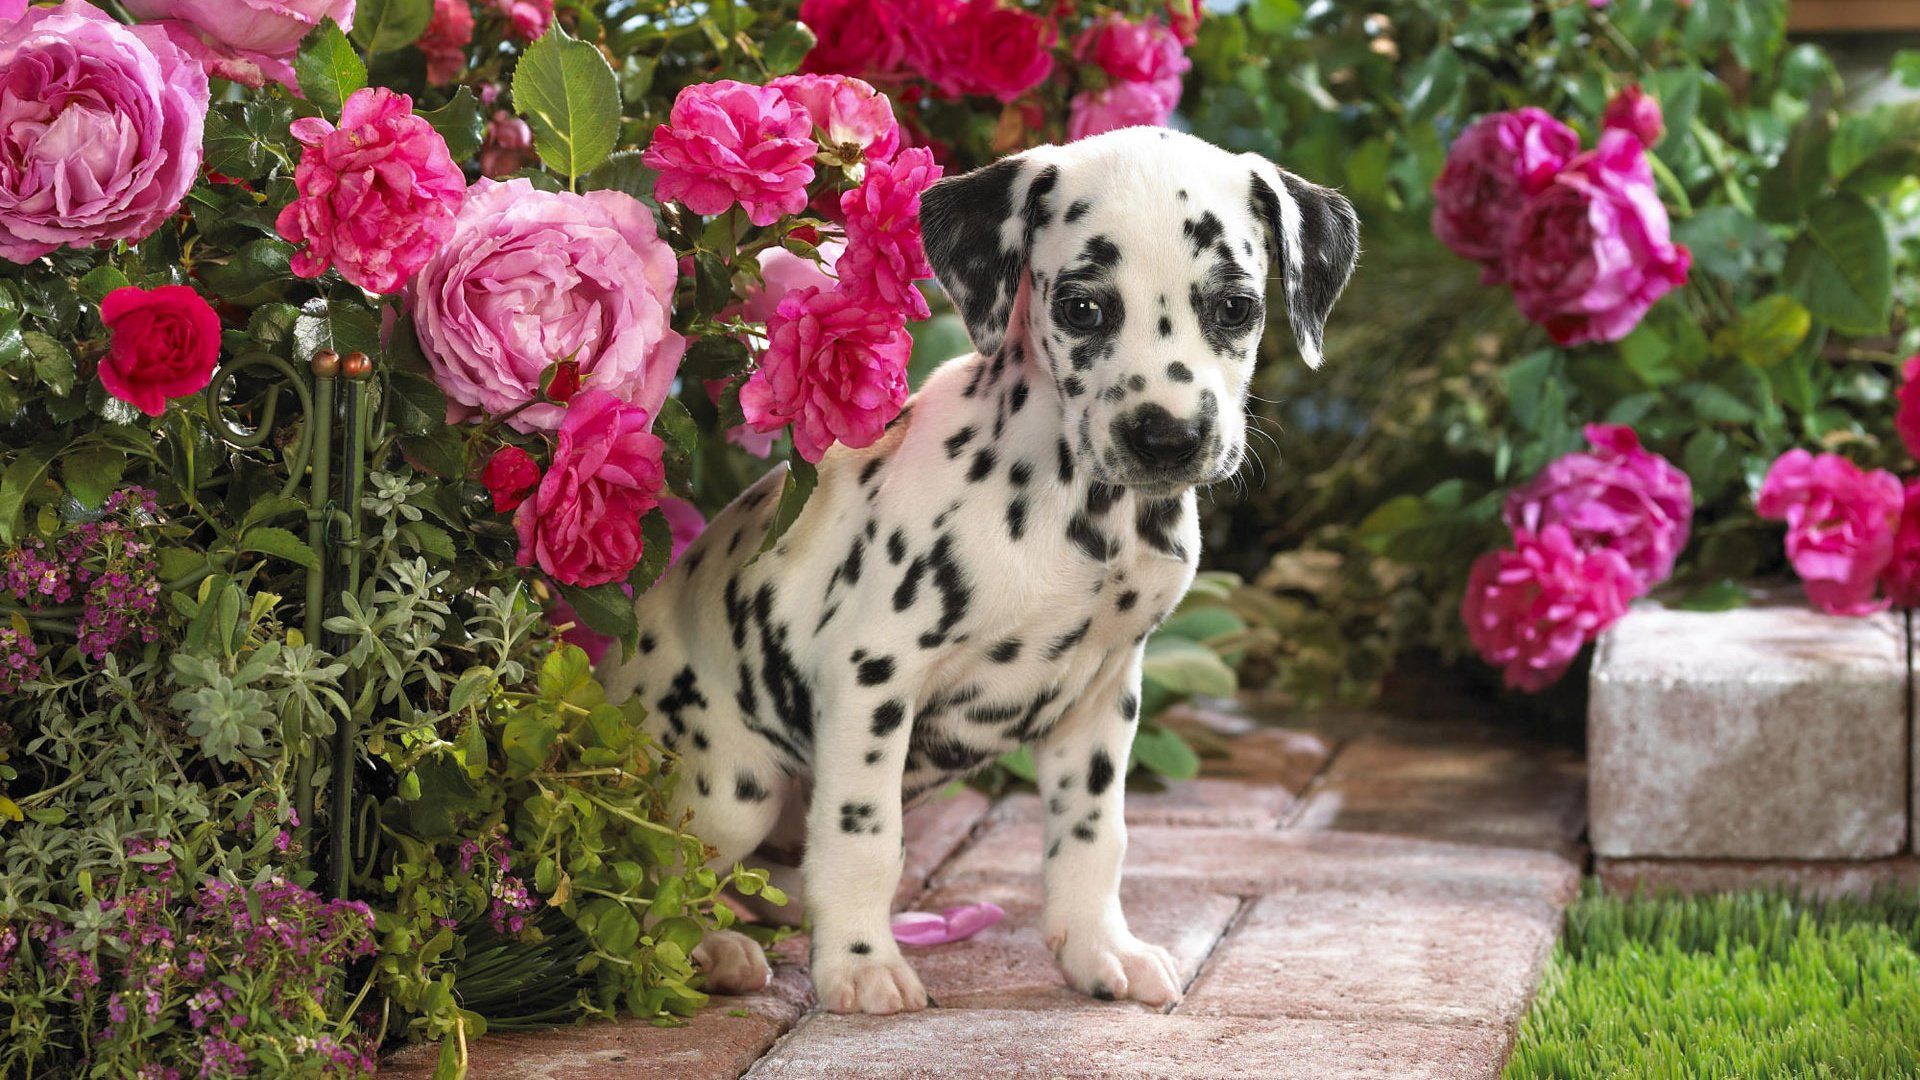 Dalmatian download free wallpapers for pc in hd